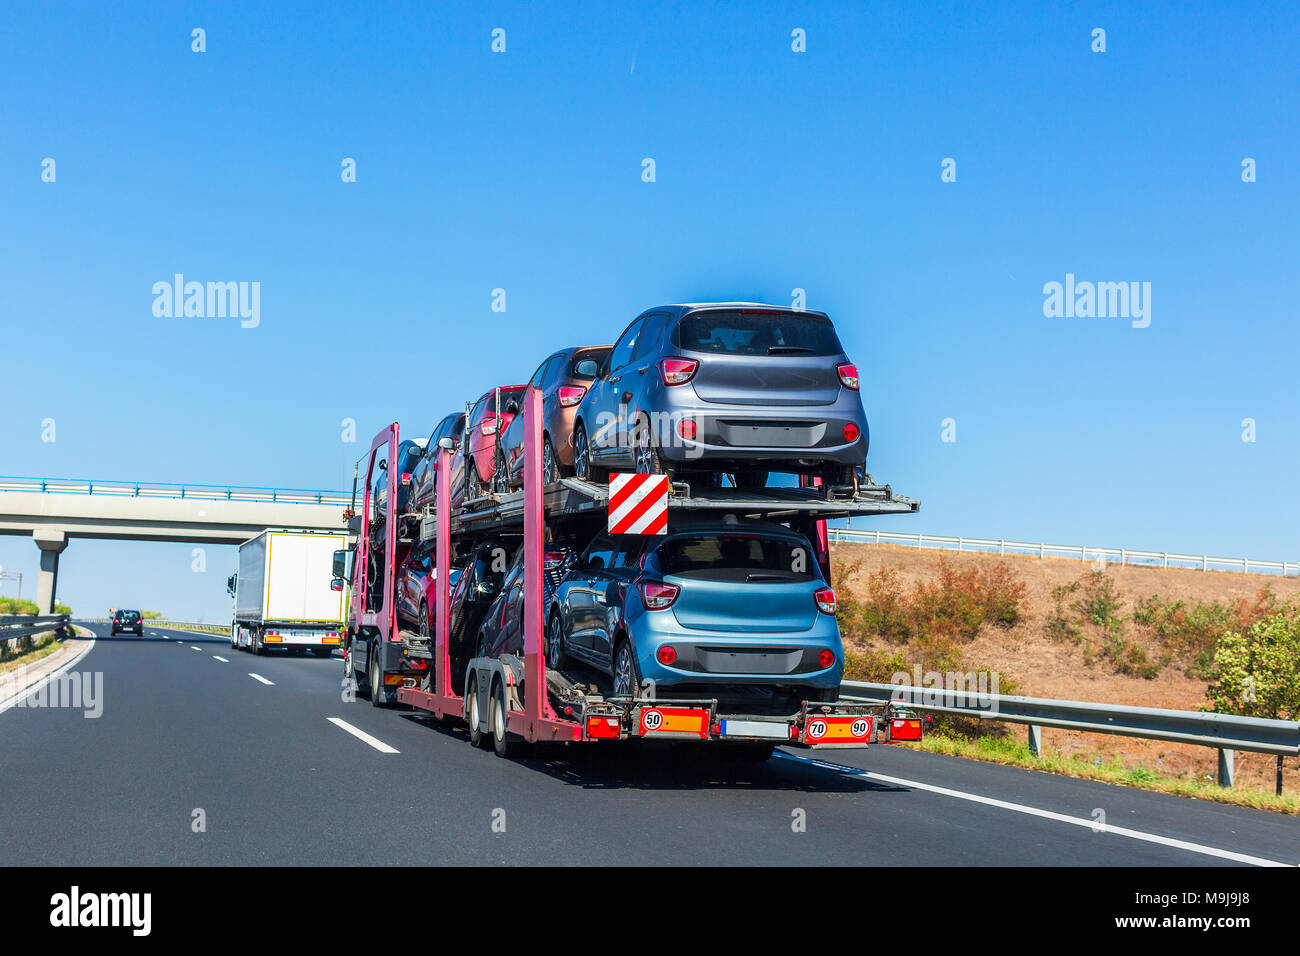 Car carrier trailer with cars on bunk platform. Car transport truck on the highway. Highway bridge. Space for text Stock Photo